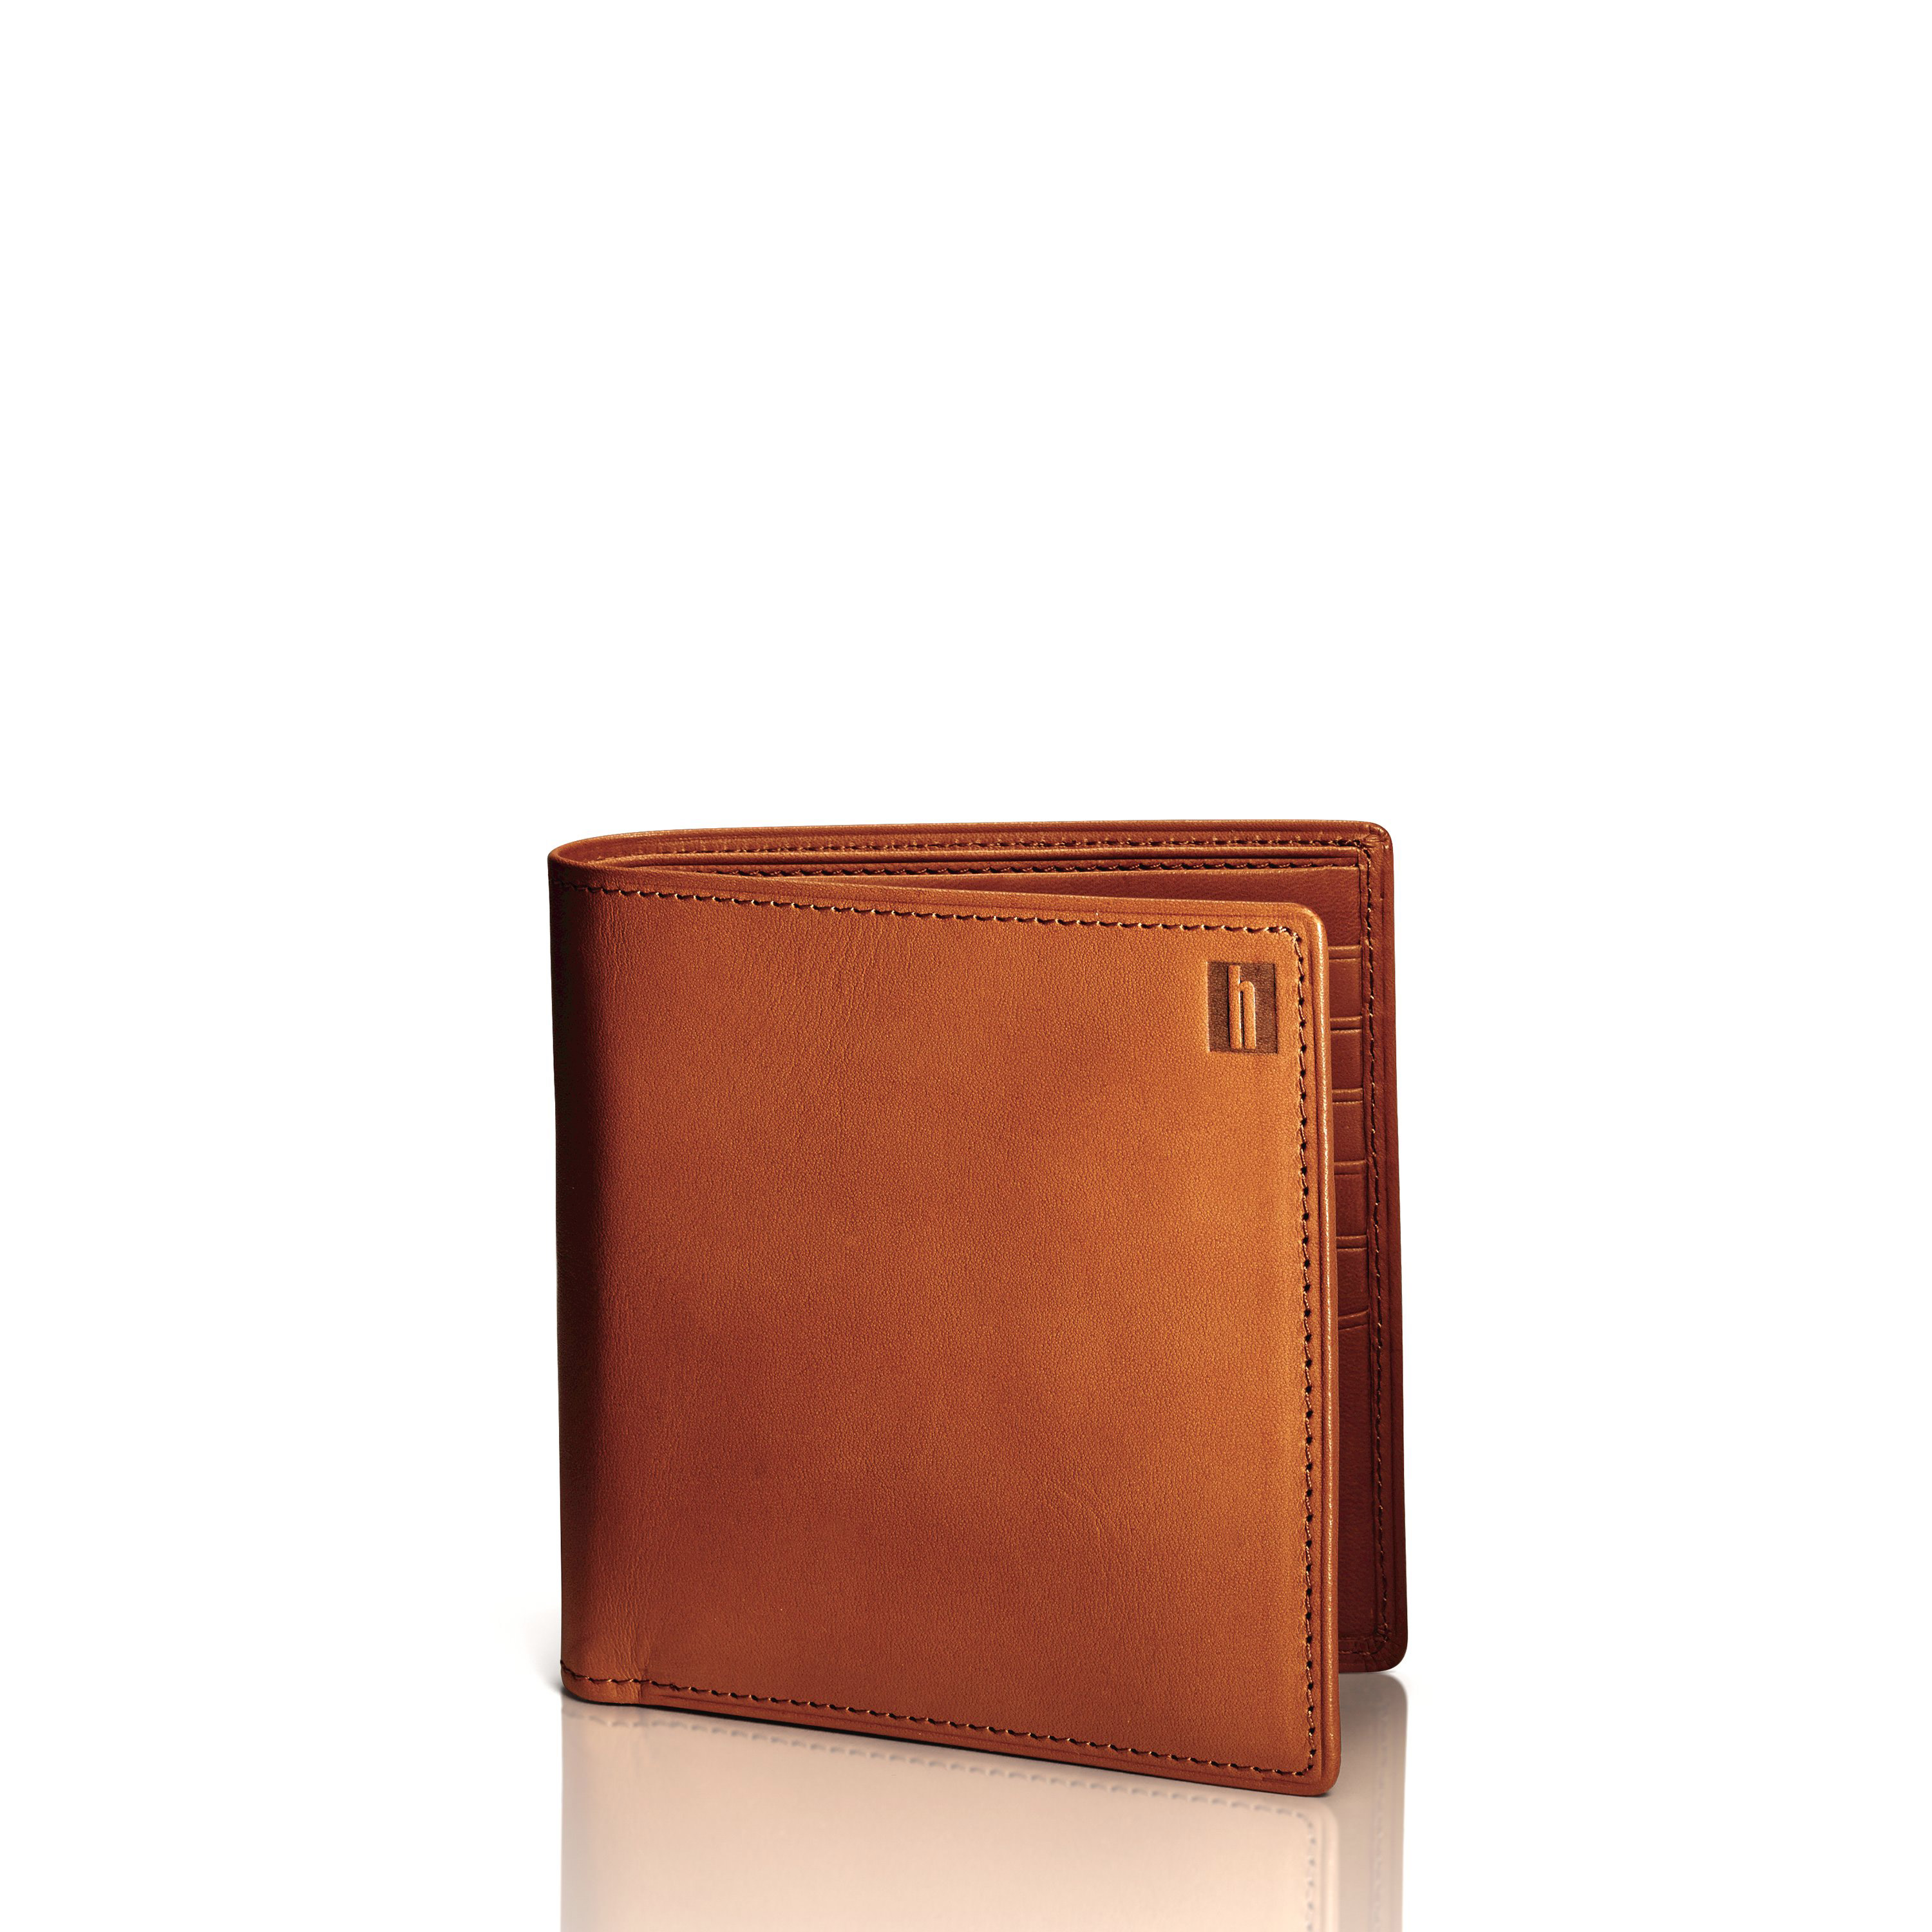 Hartmann Belting Large Wallet with Removable Card Wallet